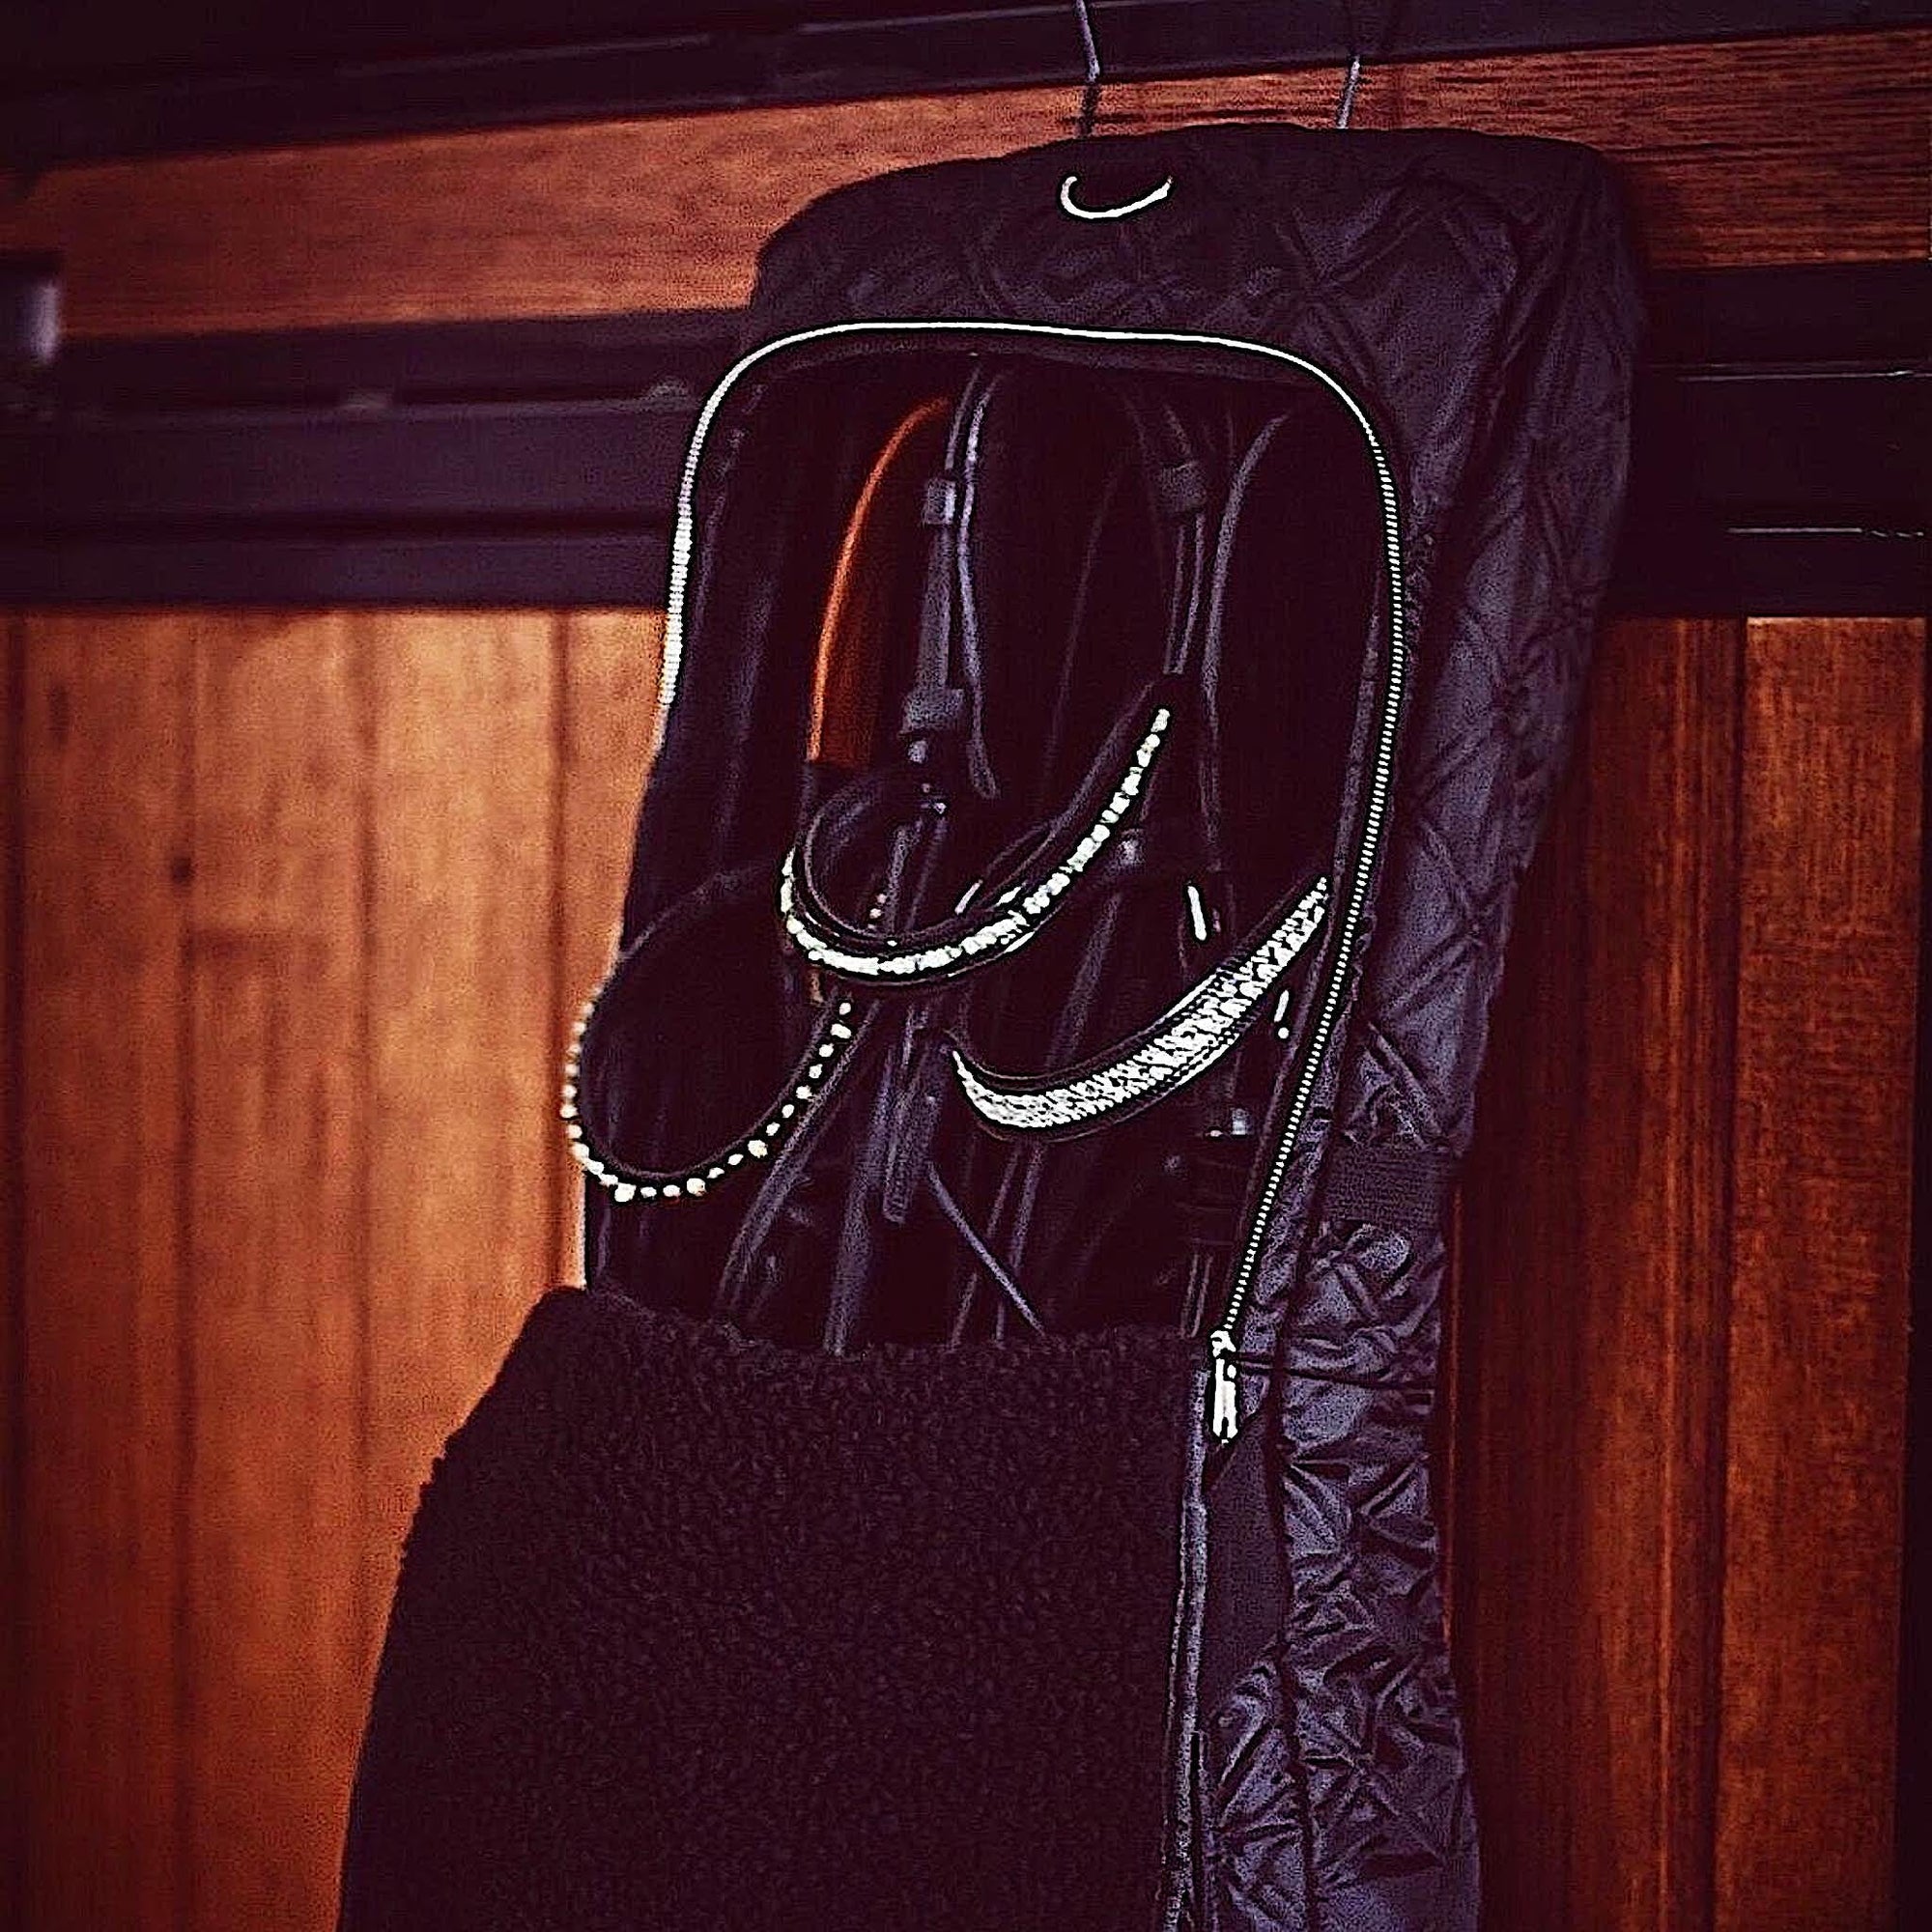 Three bridles hanging in black bridle bag with a fleece interior.